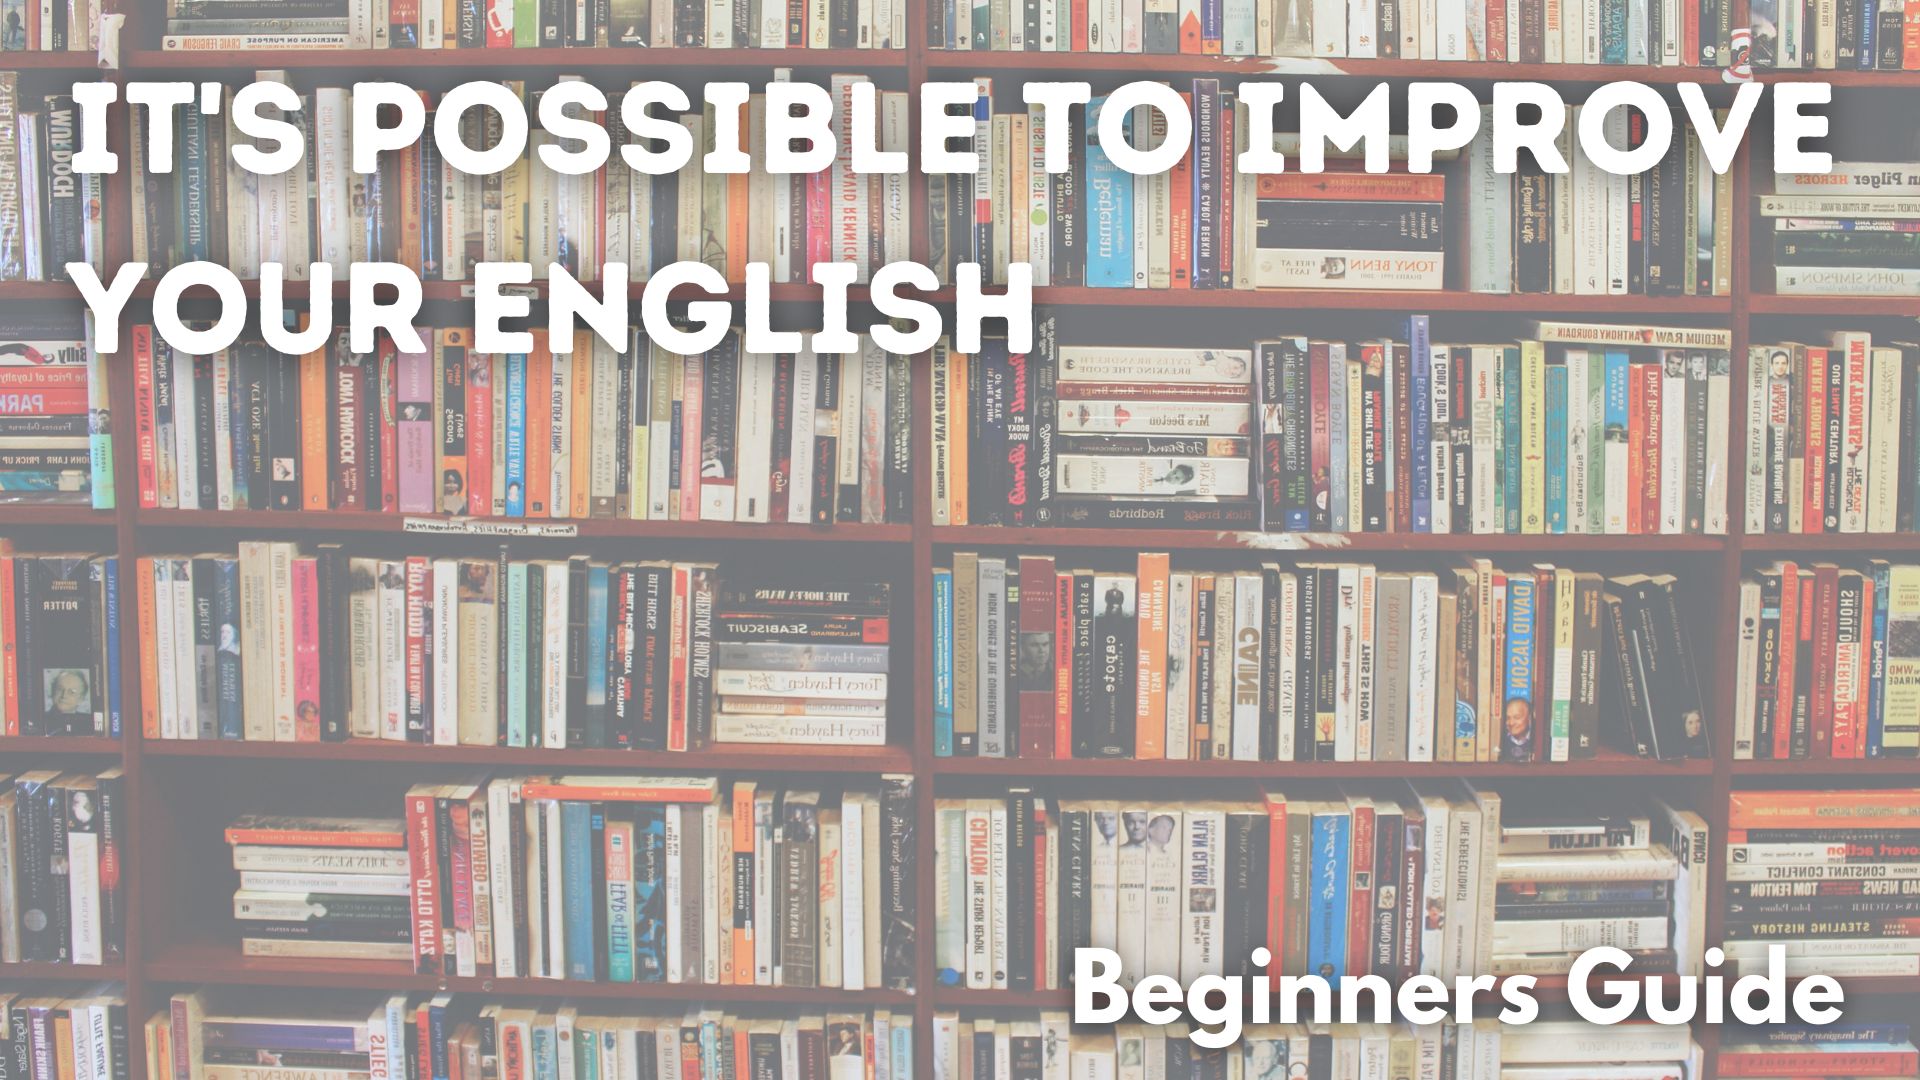 It's Possible To Improve Your English